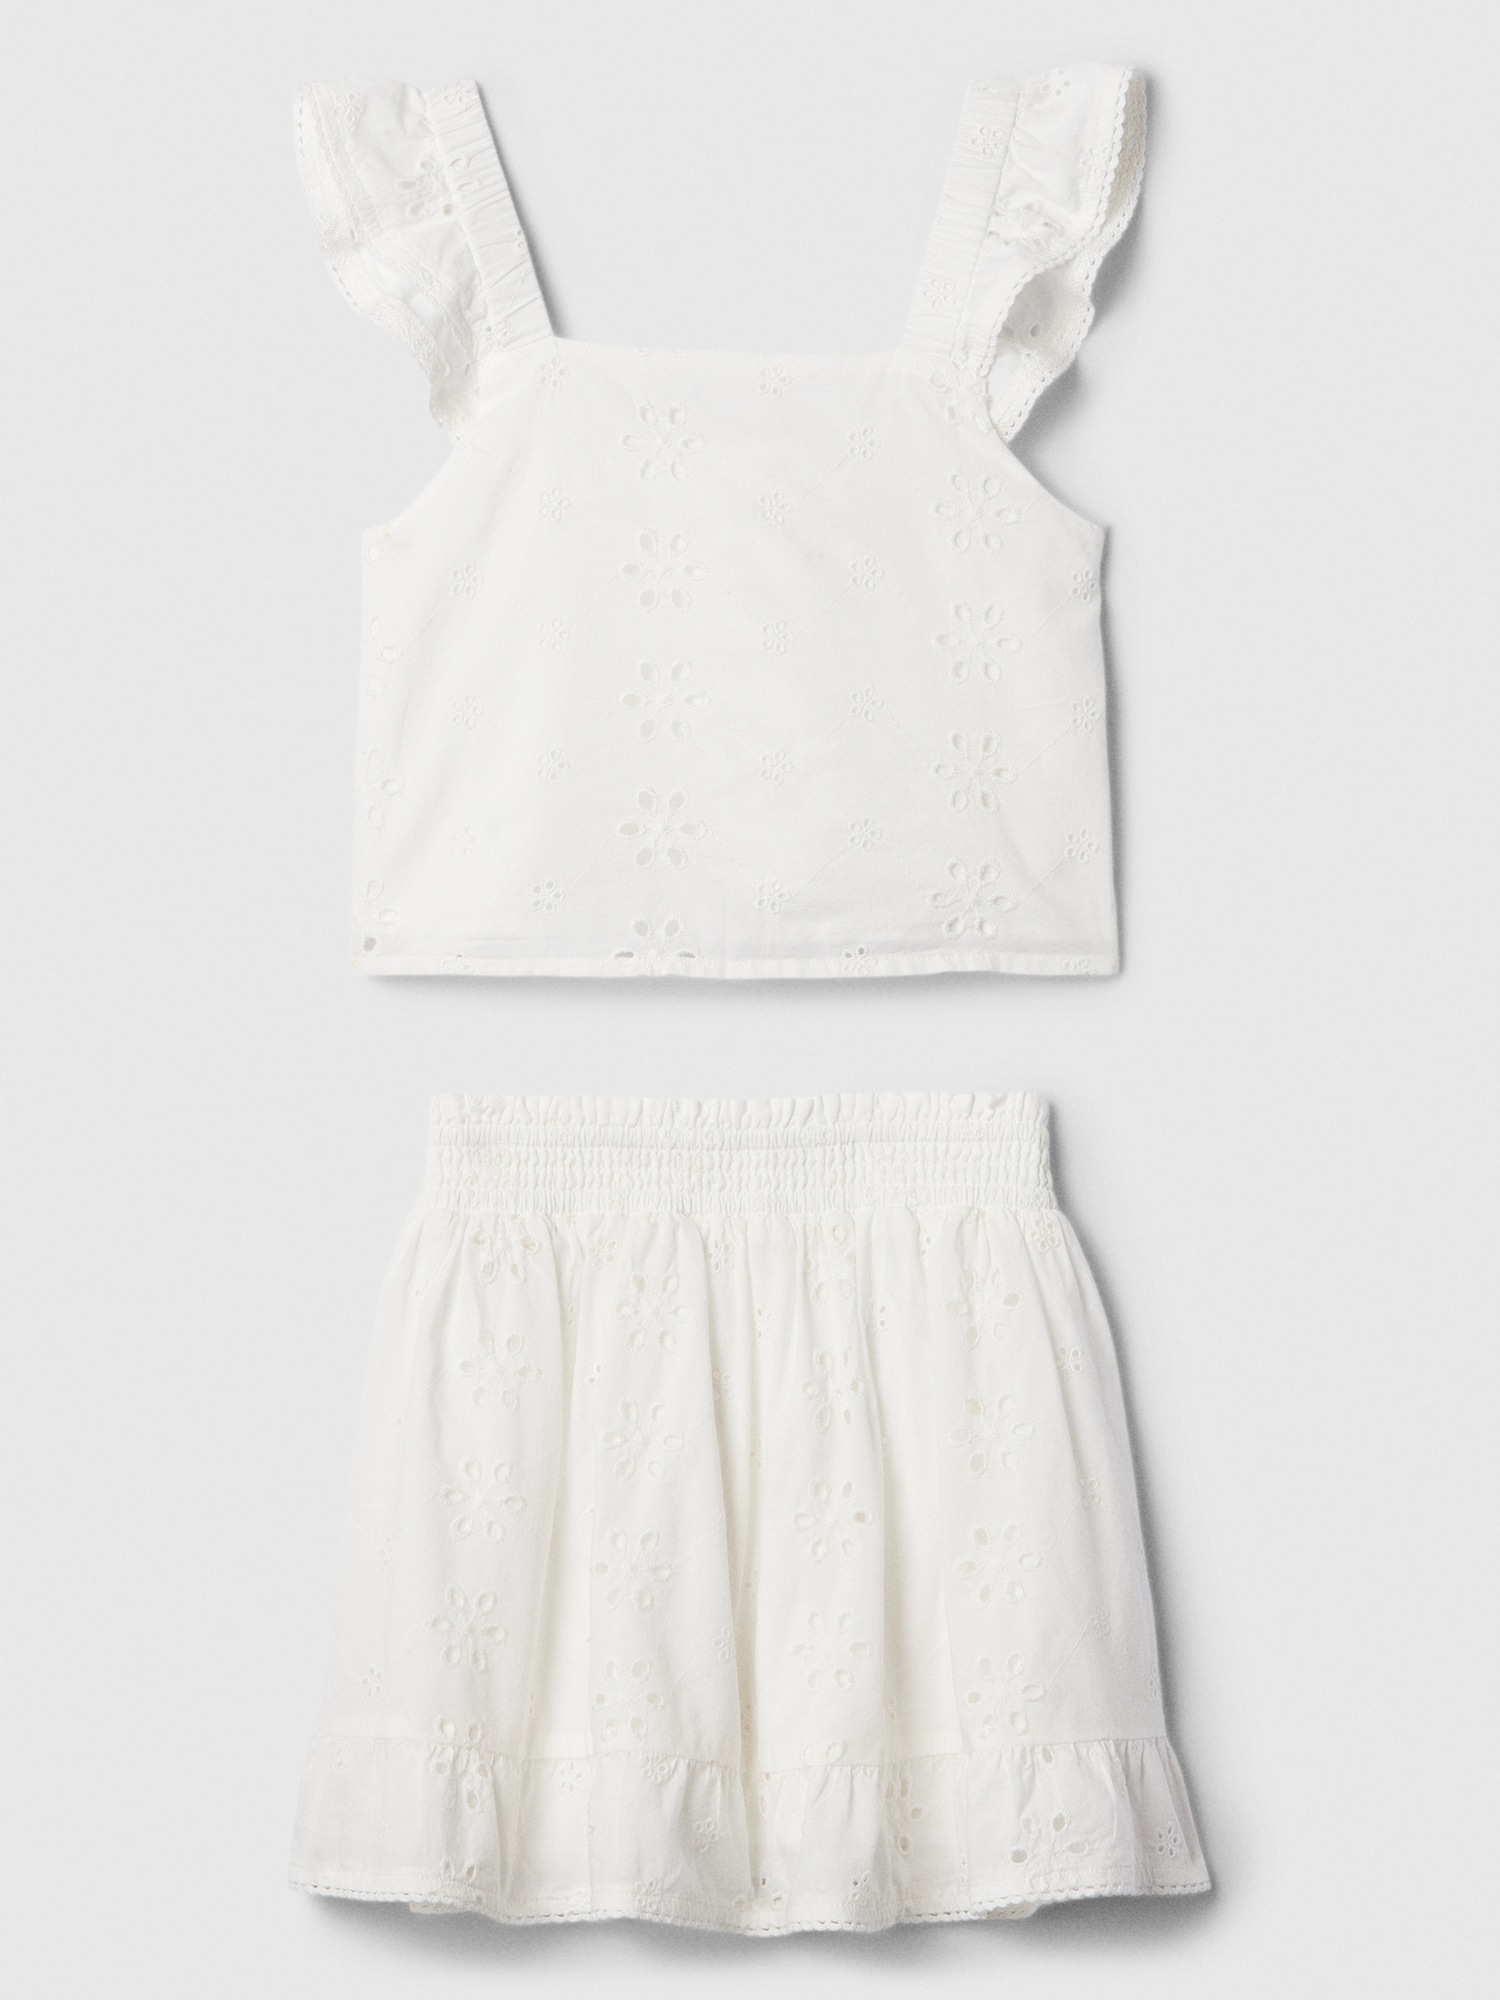 Kids Skirt Two-Piece Outfit Set